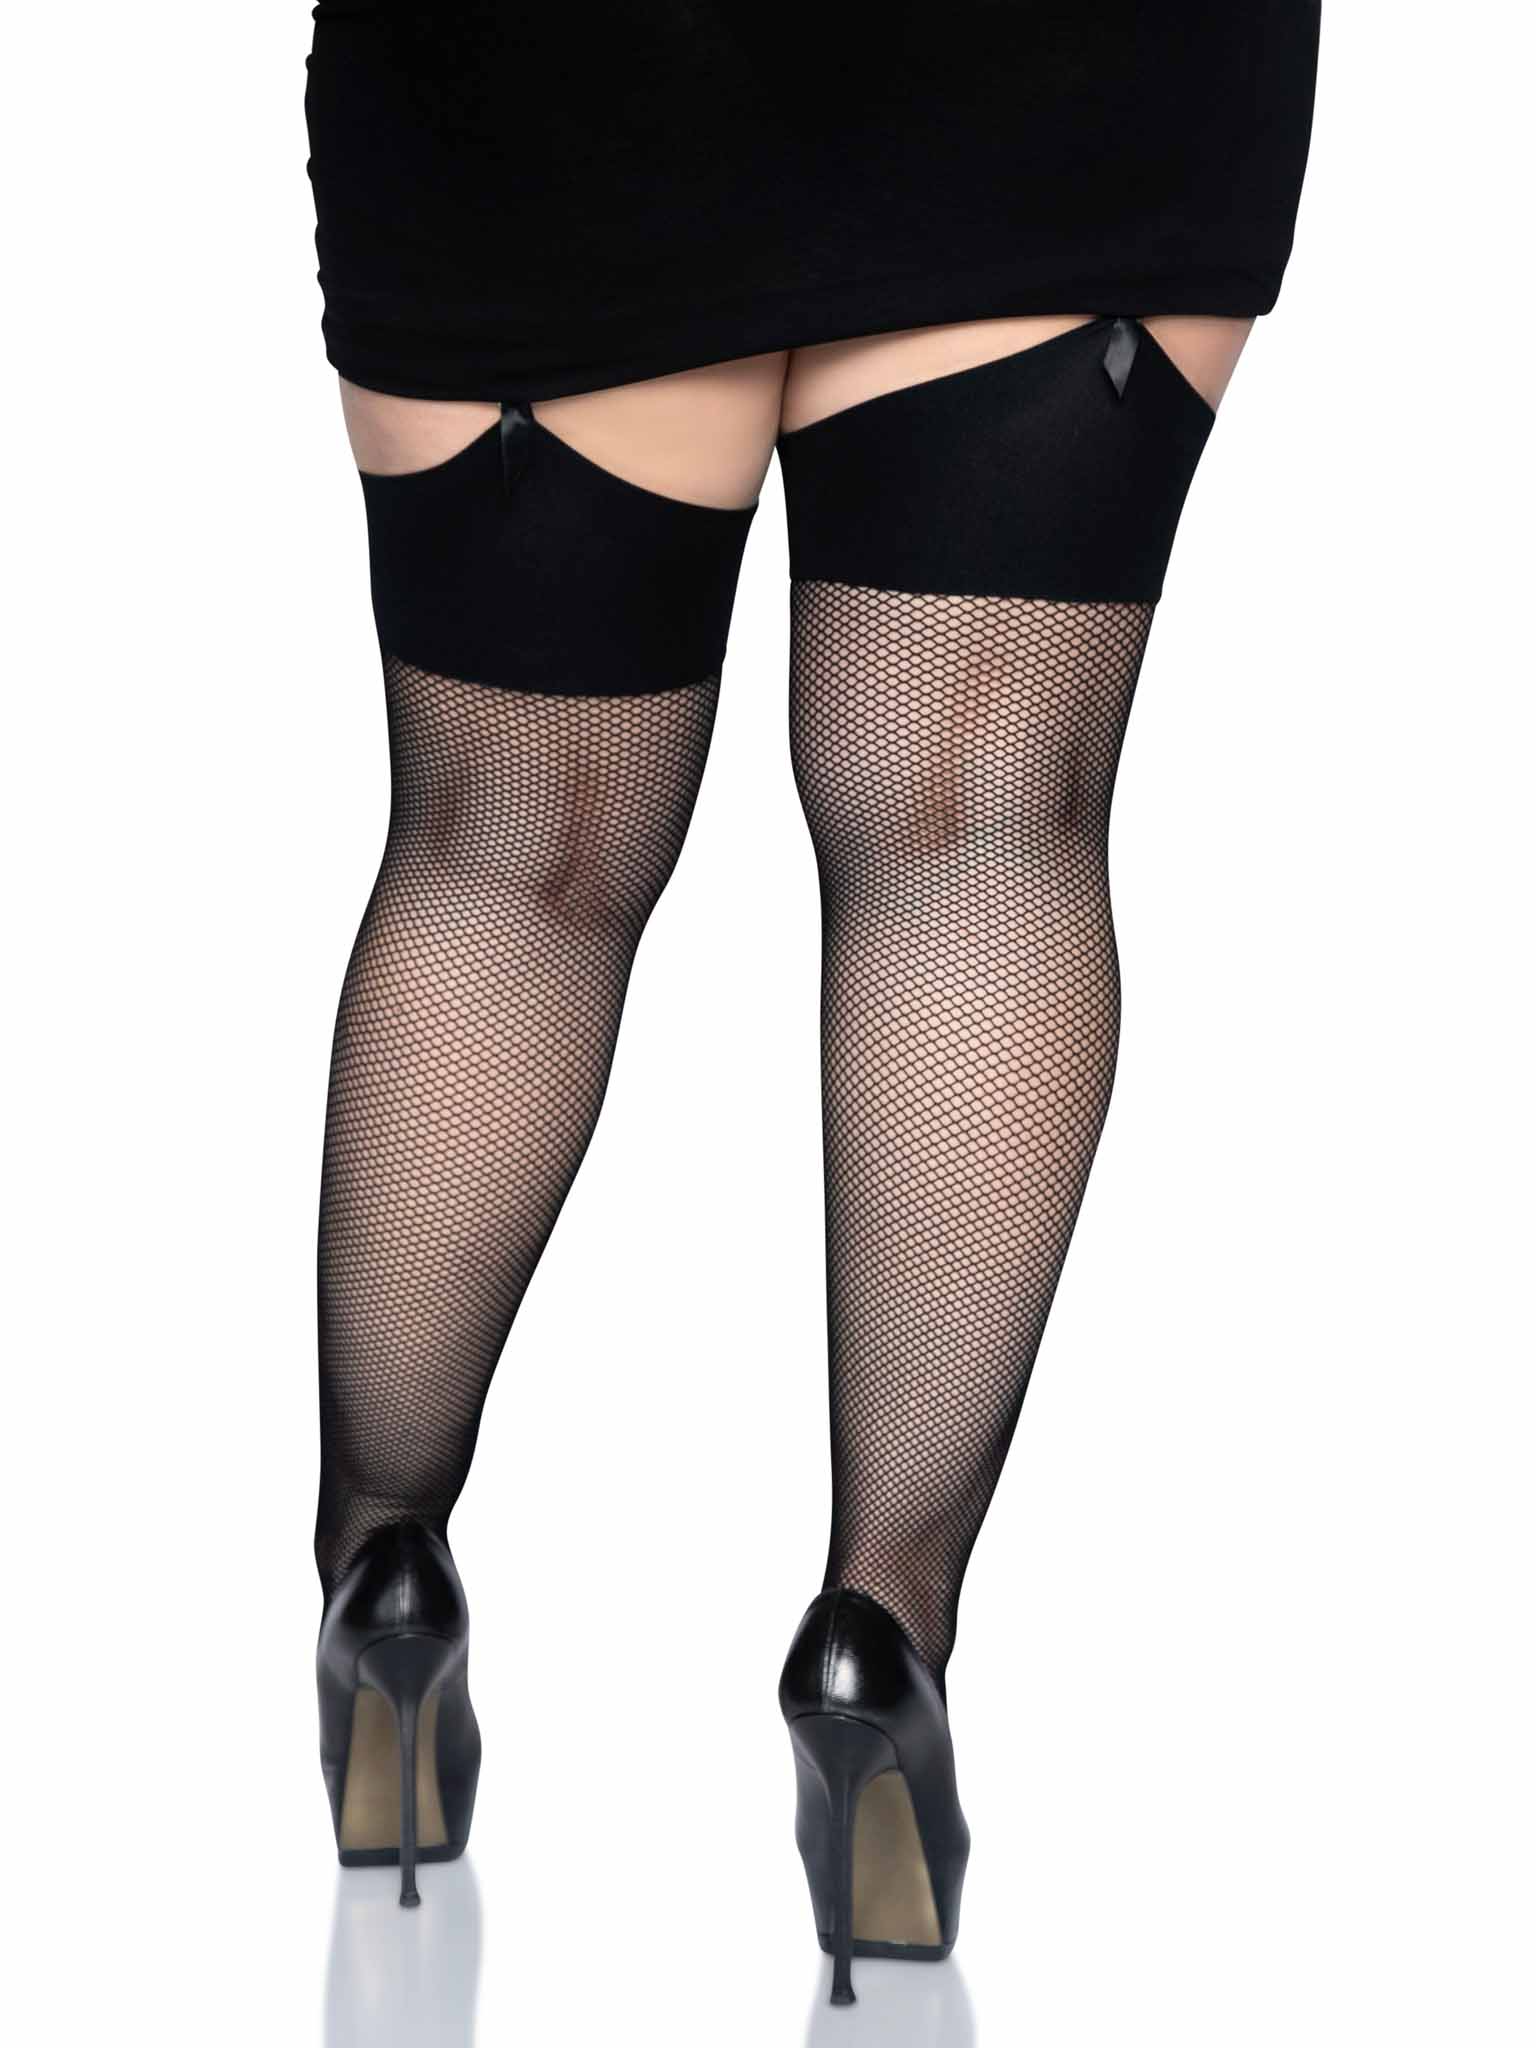 Plus Size Stockings and Tights – Unique Vintage